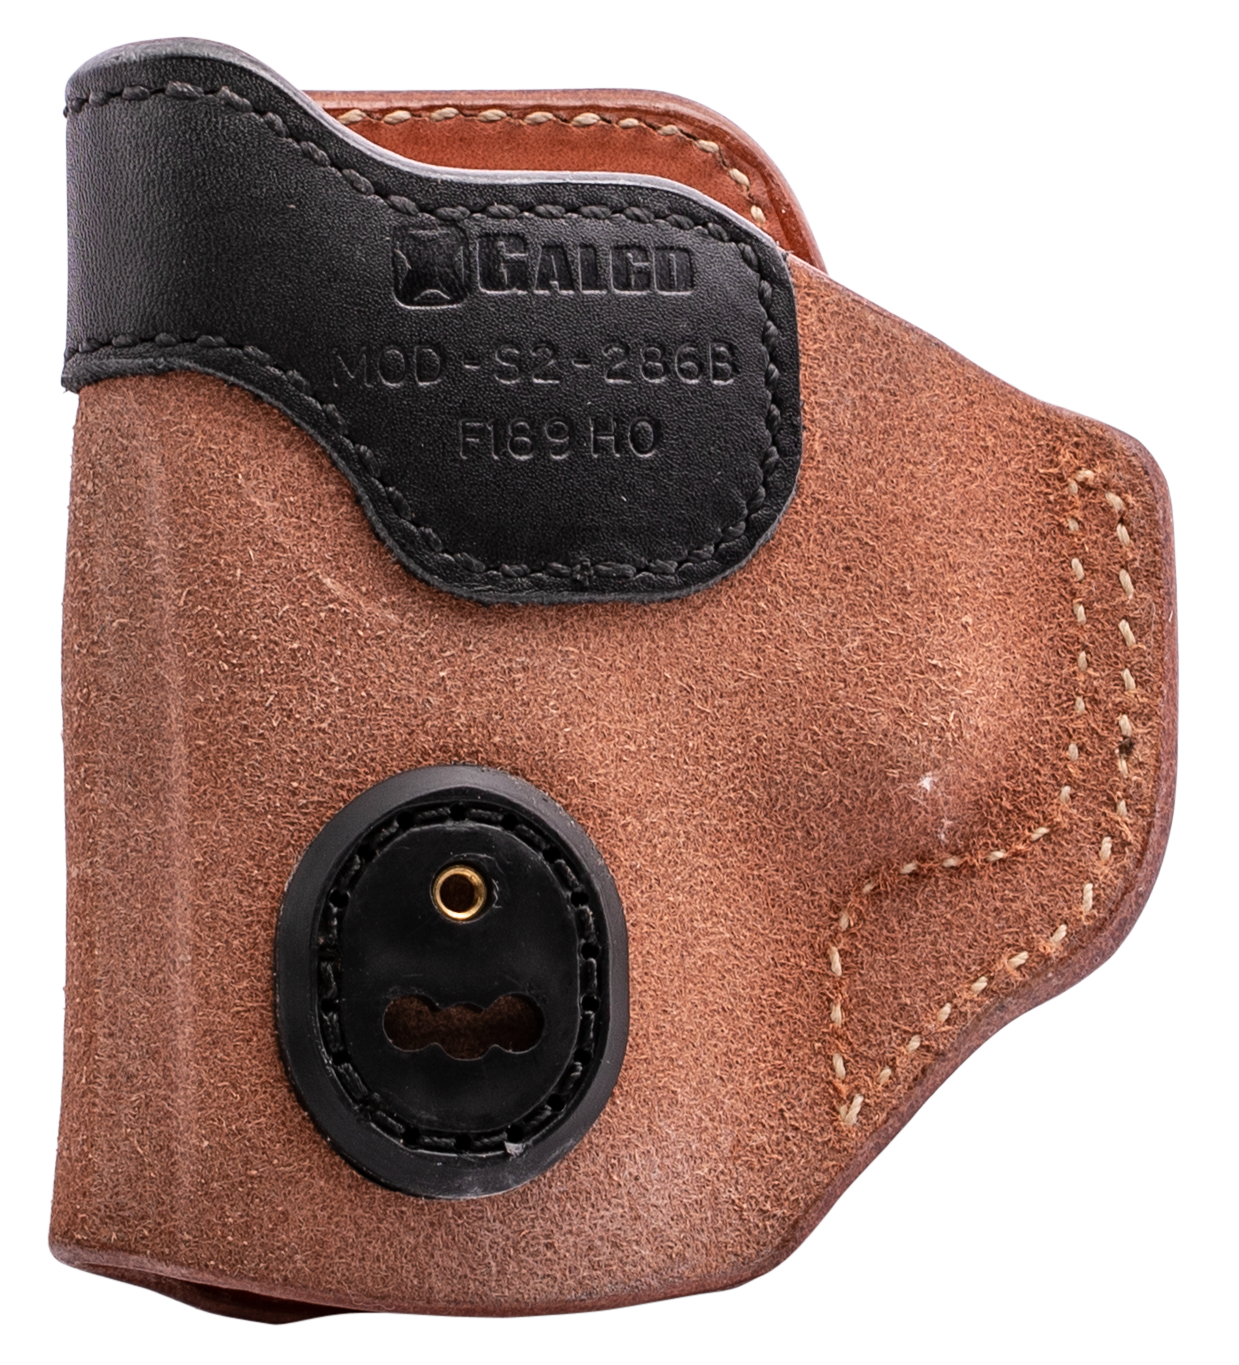 Galco Scout 3.0 IWB Holster - GLOCK 27